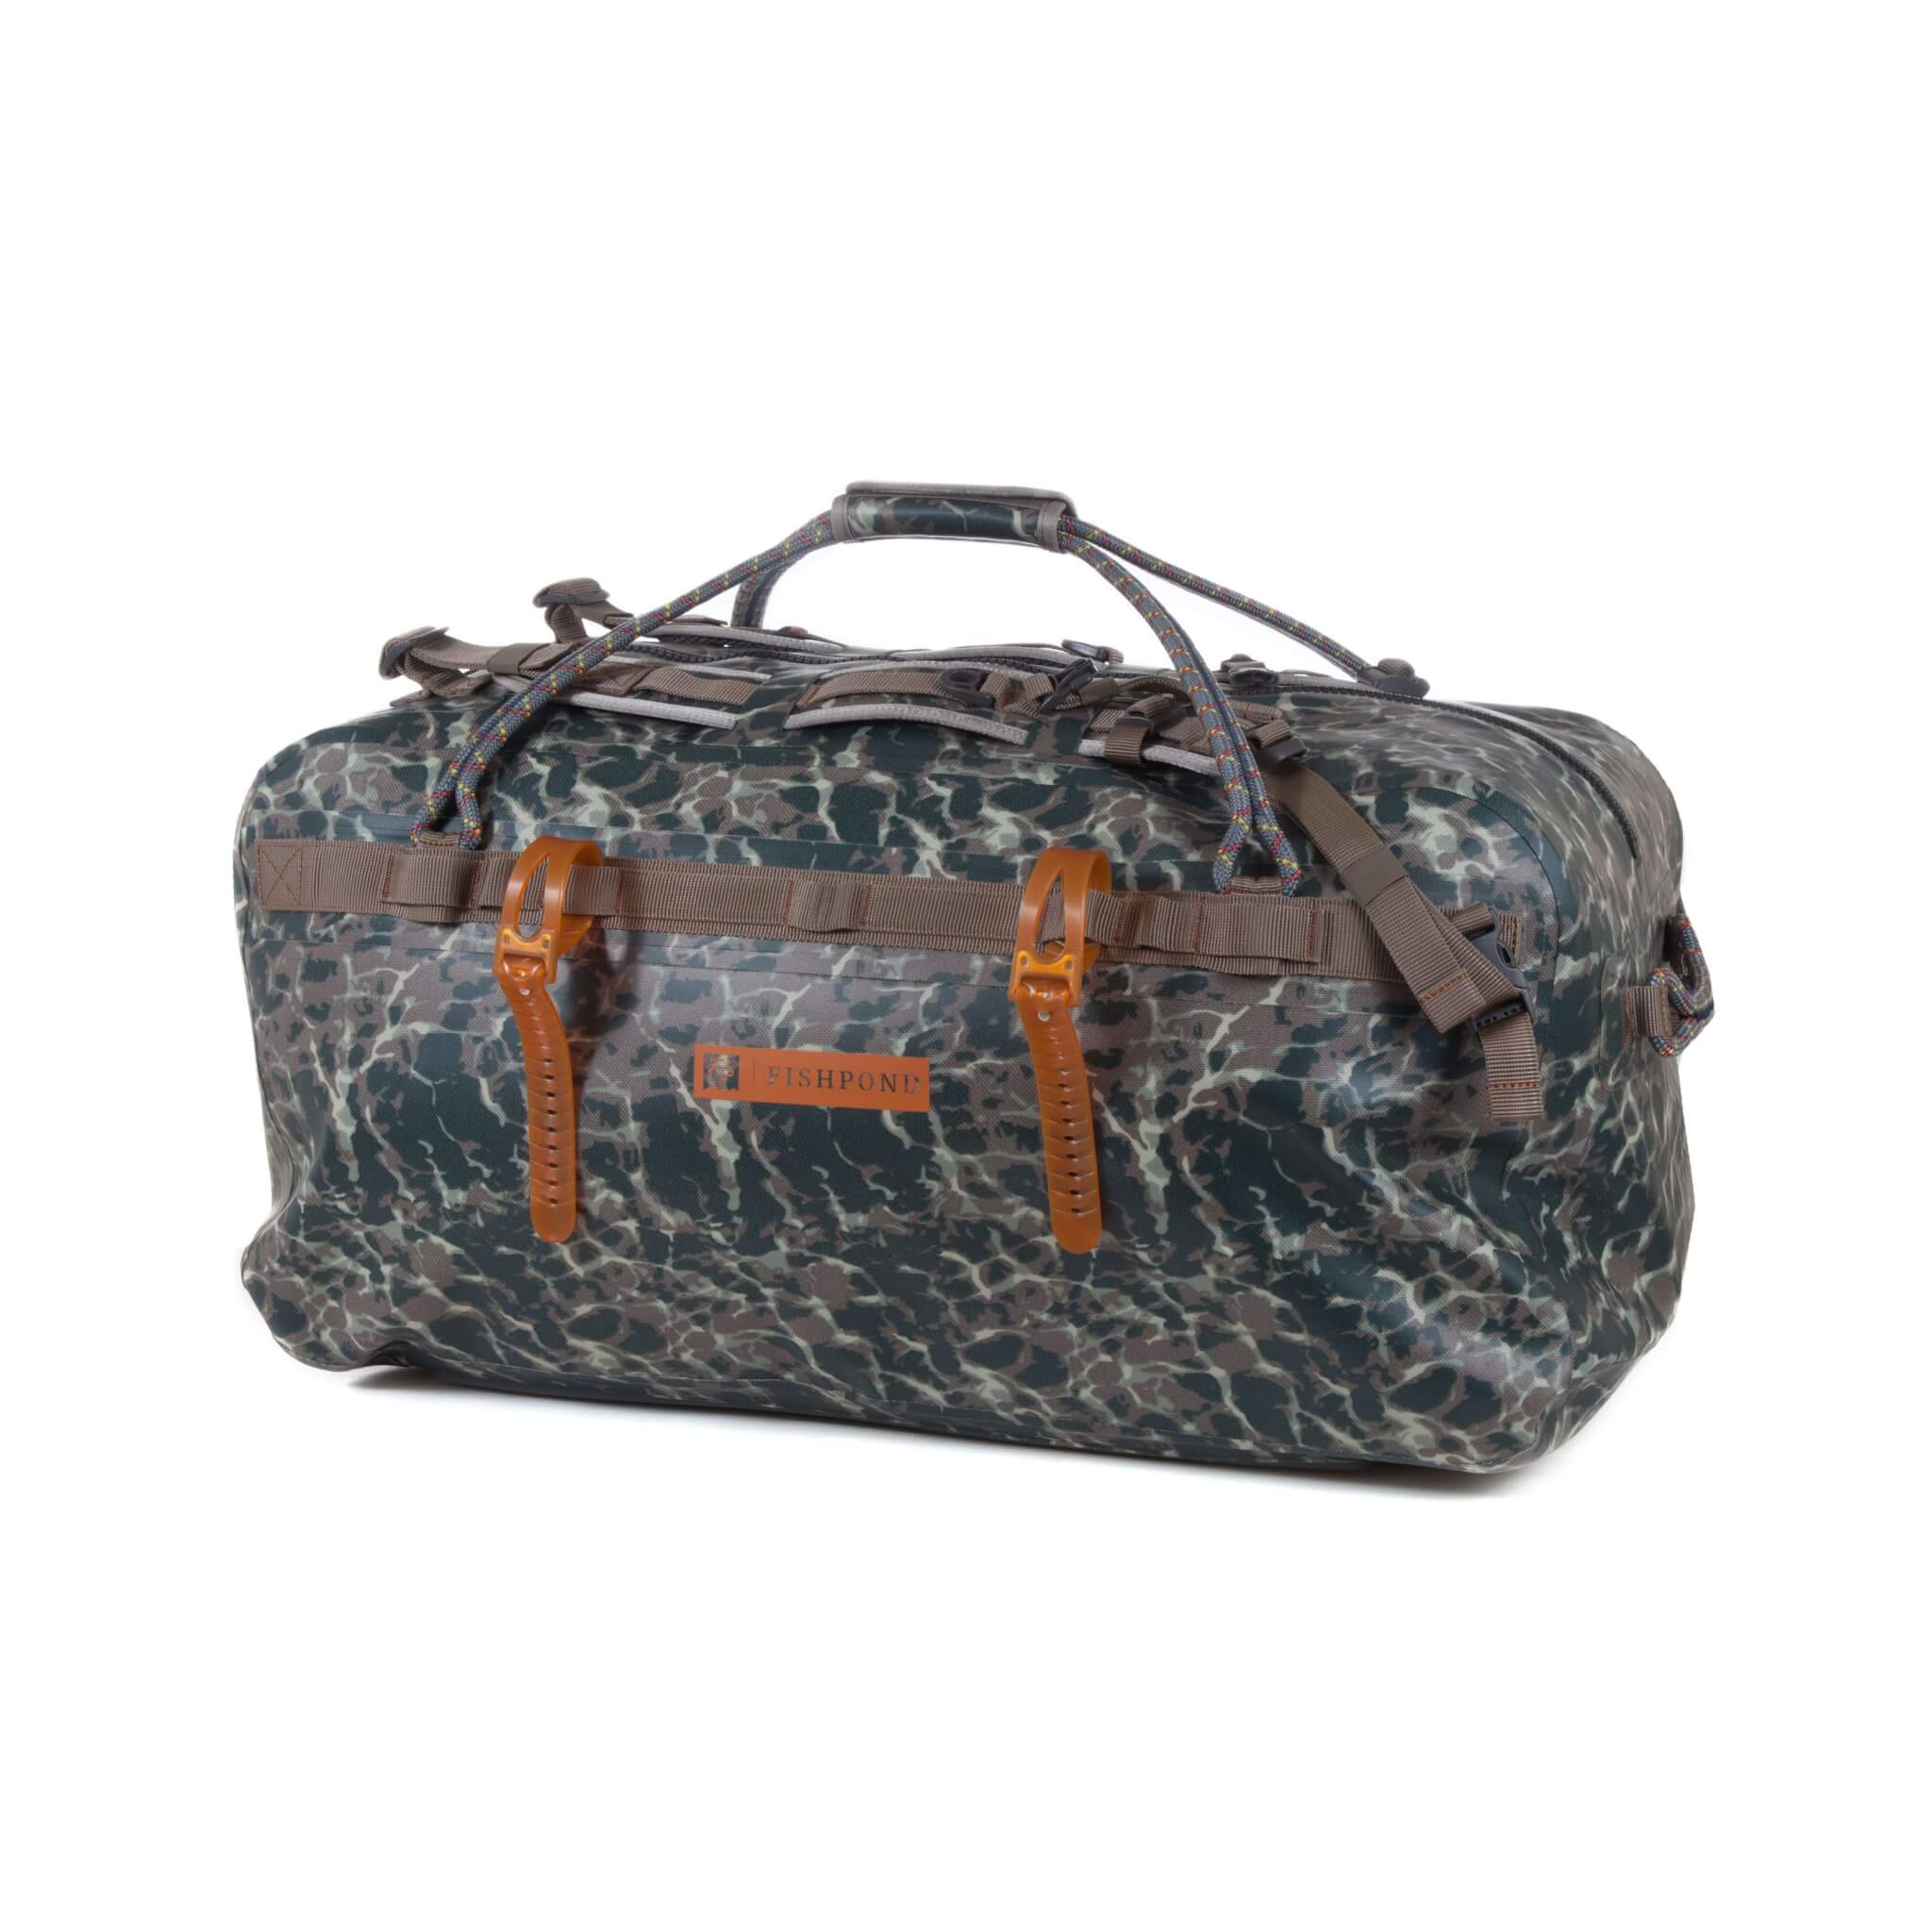 Fishpond Thunderhead Large Submersible Duffel - Riverbed Camo